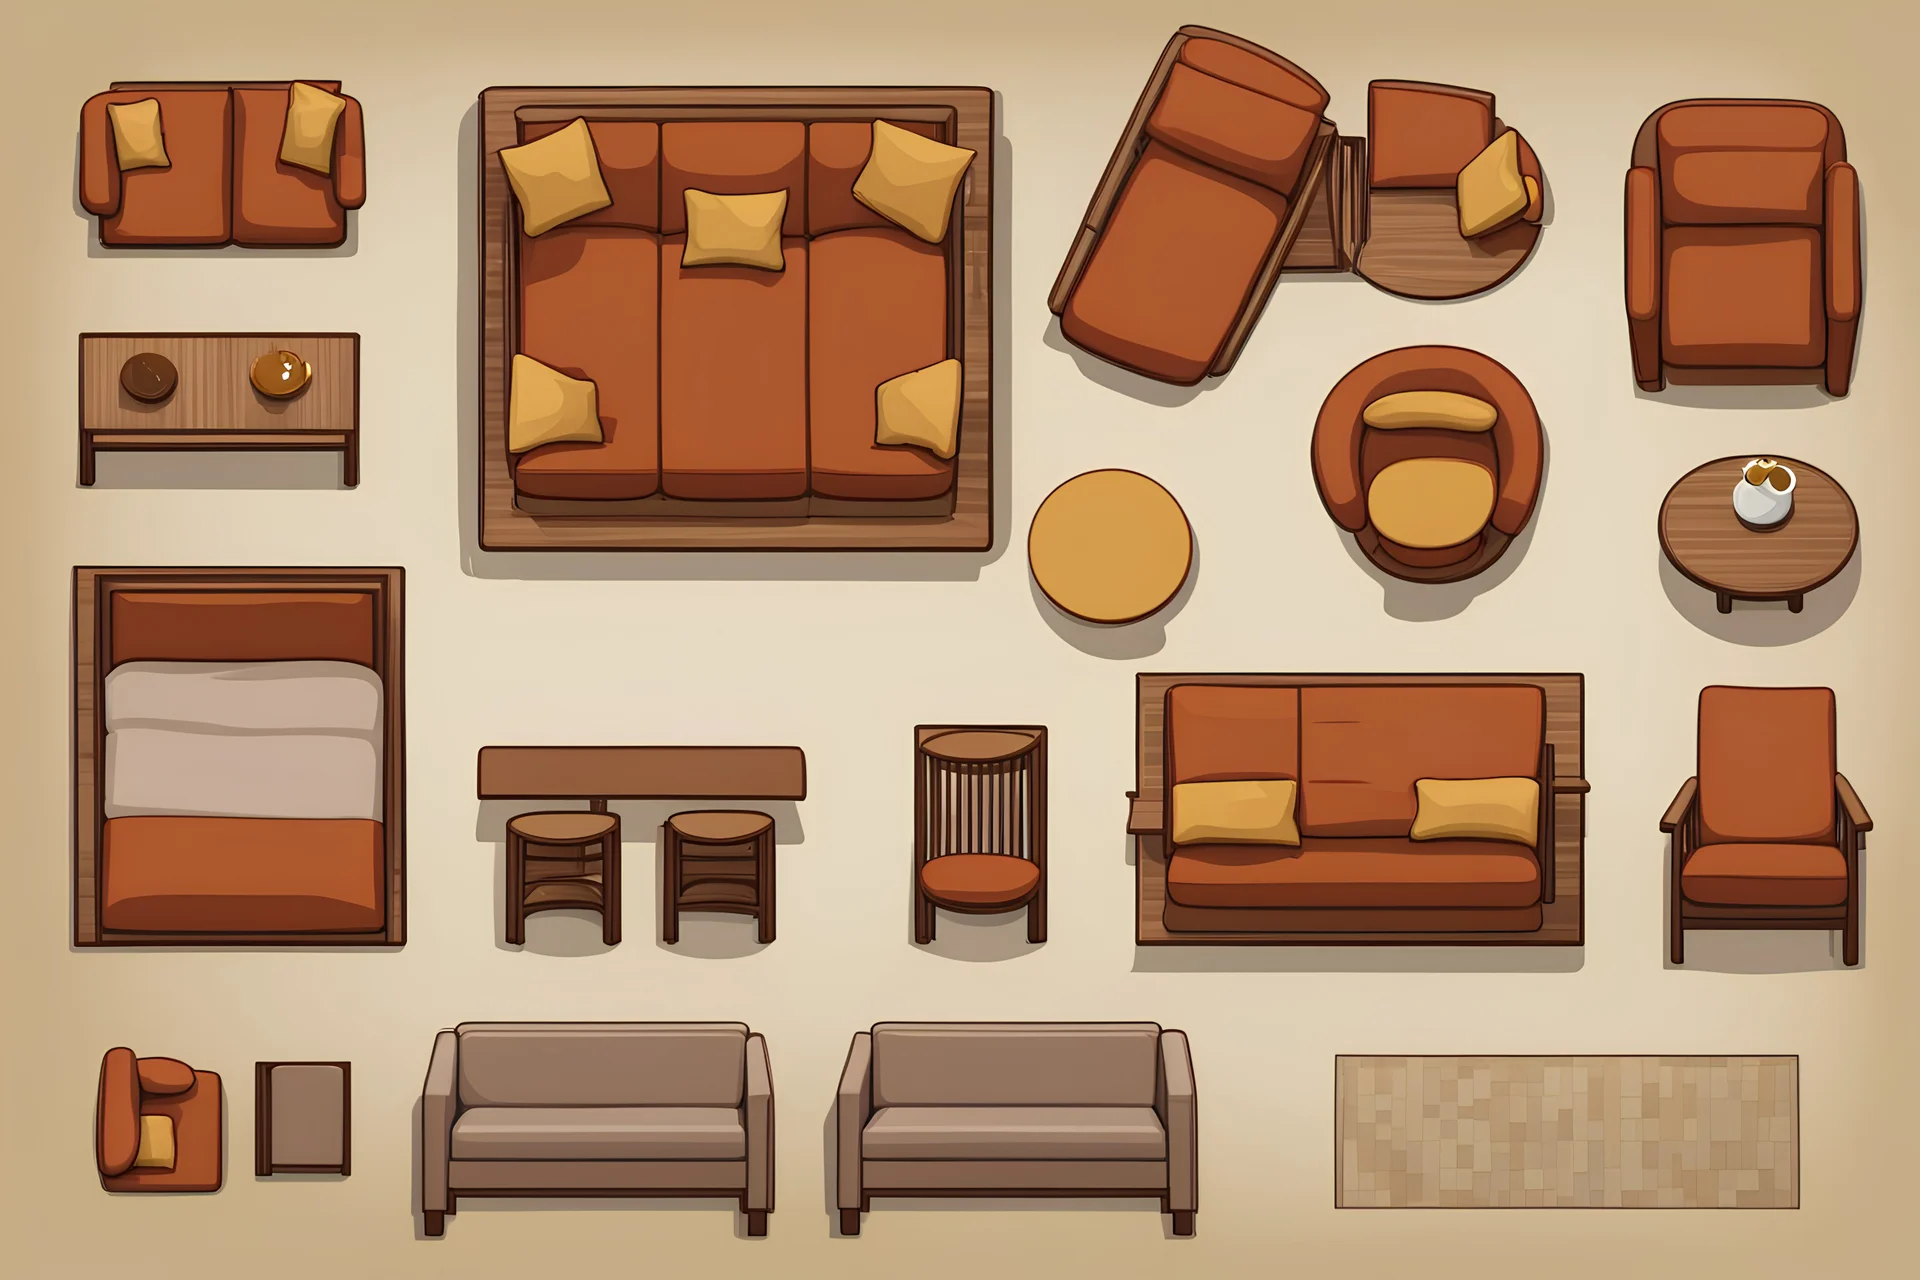 Sprite sheet, furniture, architectural, couch, table, chair, top view,